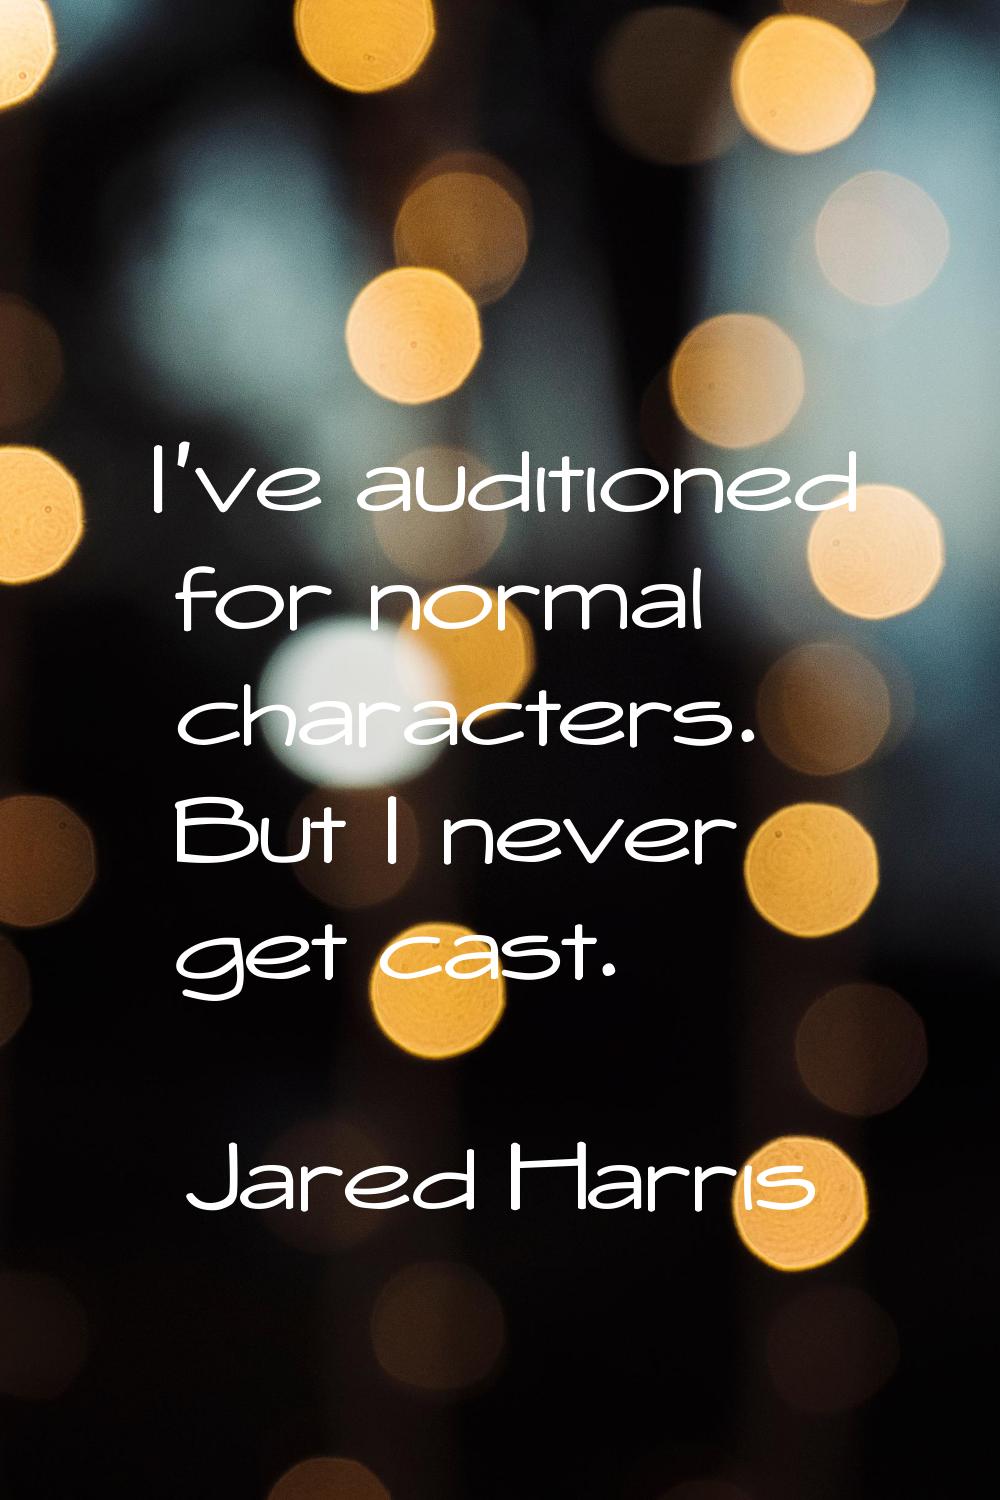 I've auditioned for normal characters. But I never get cast.